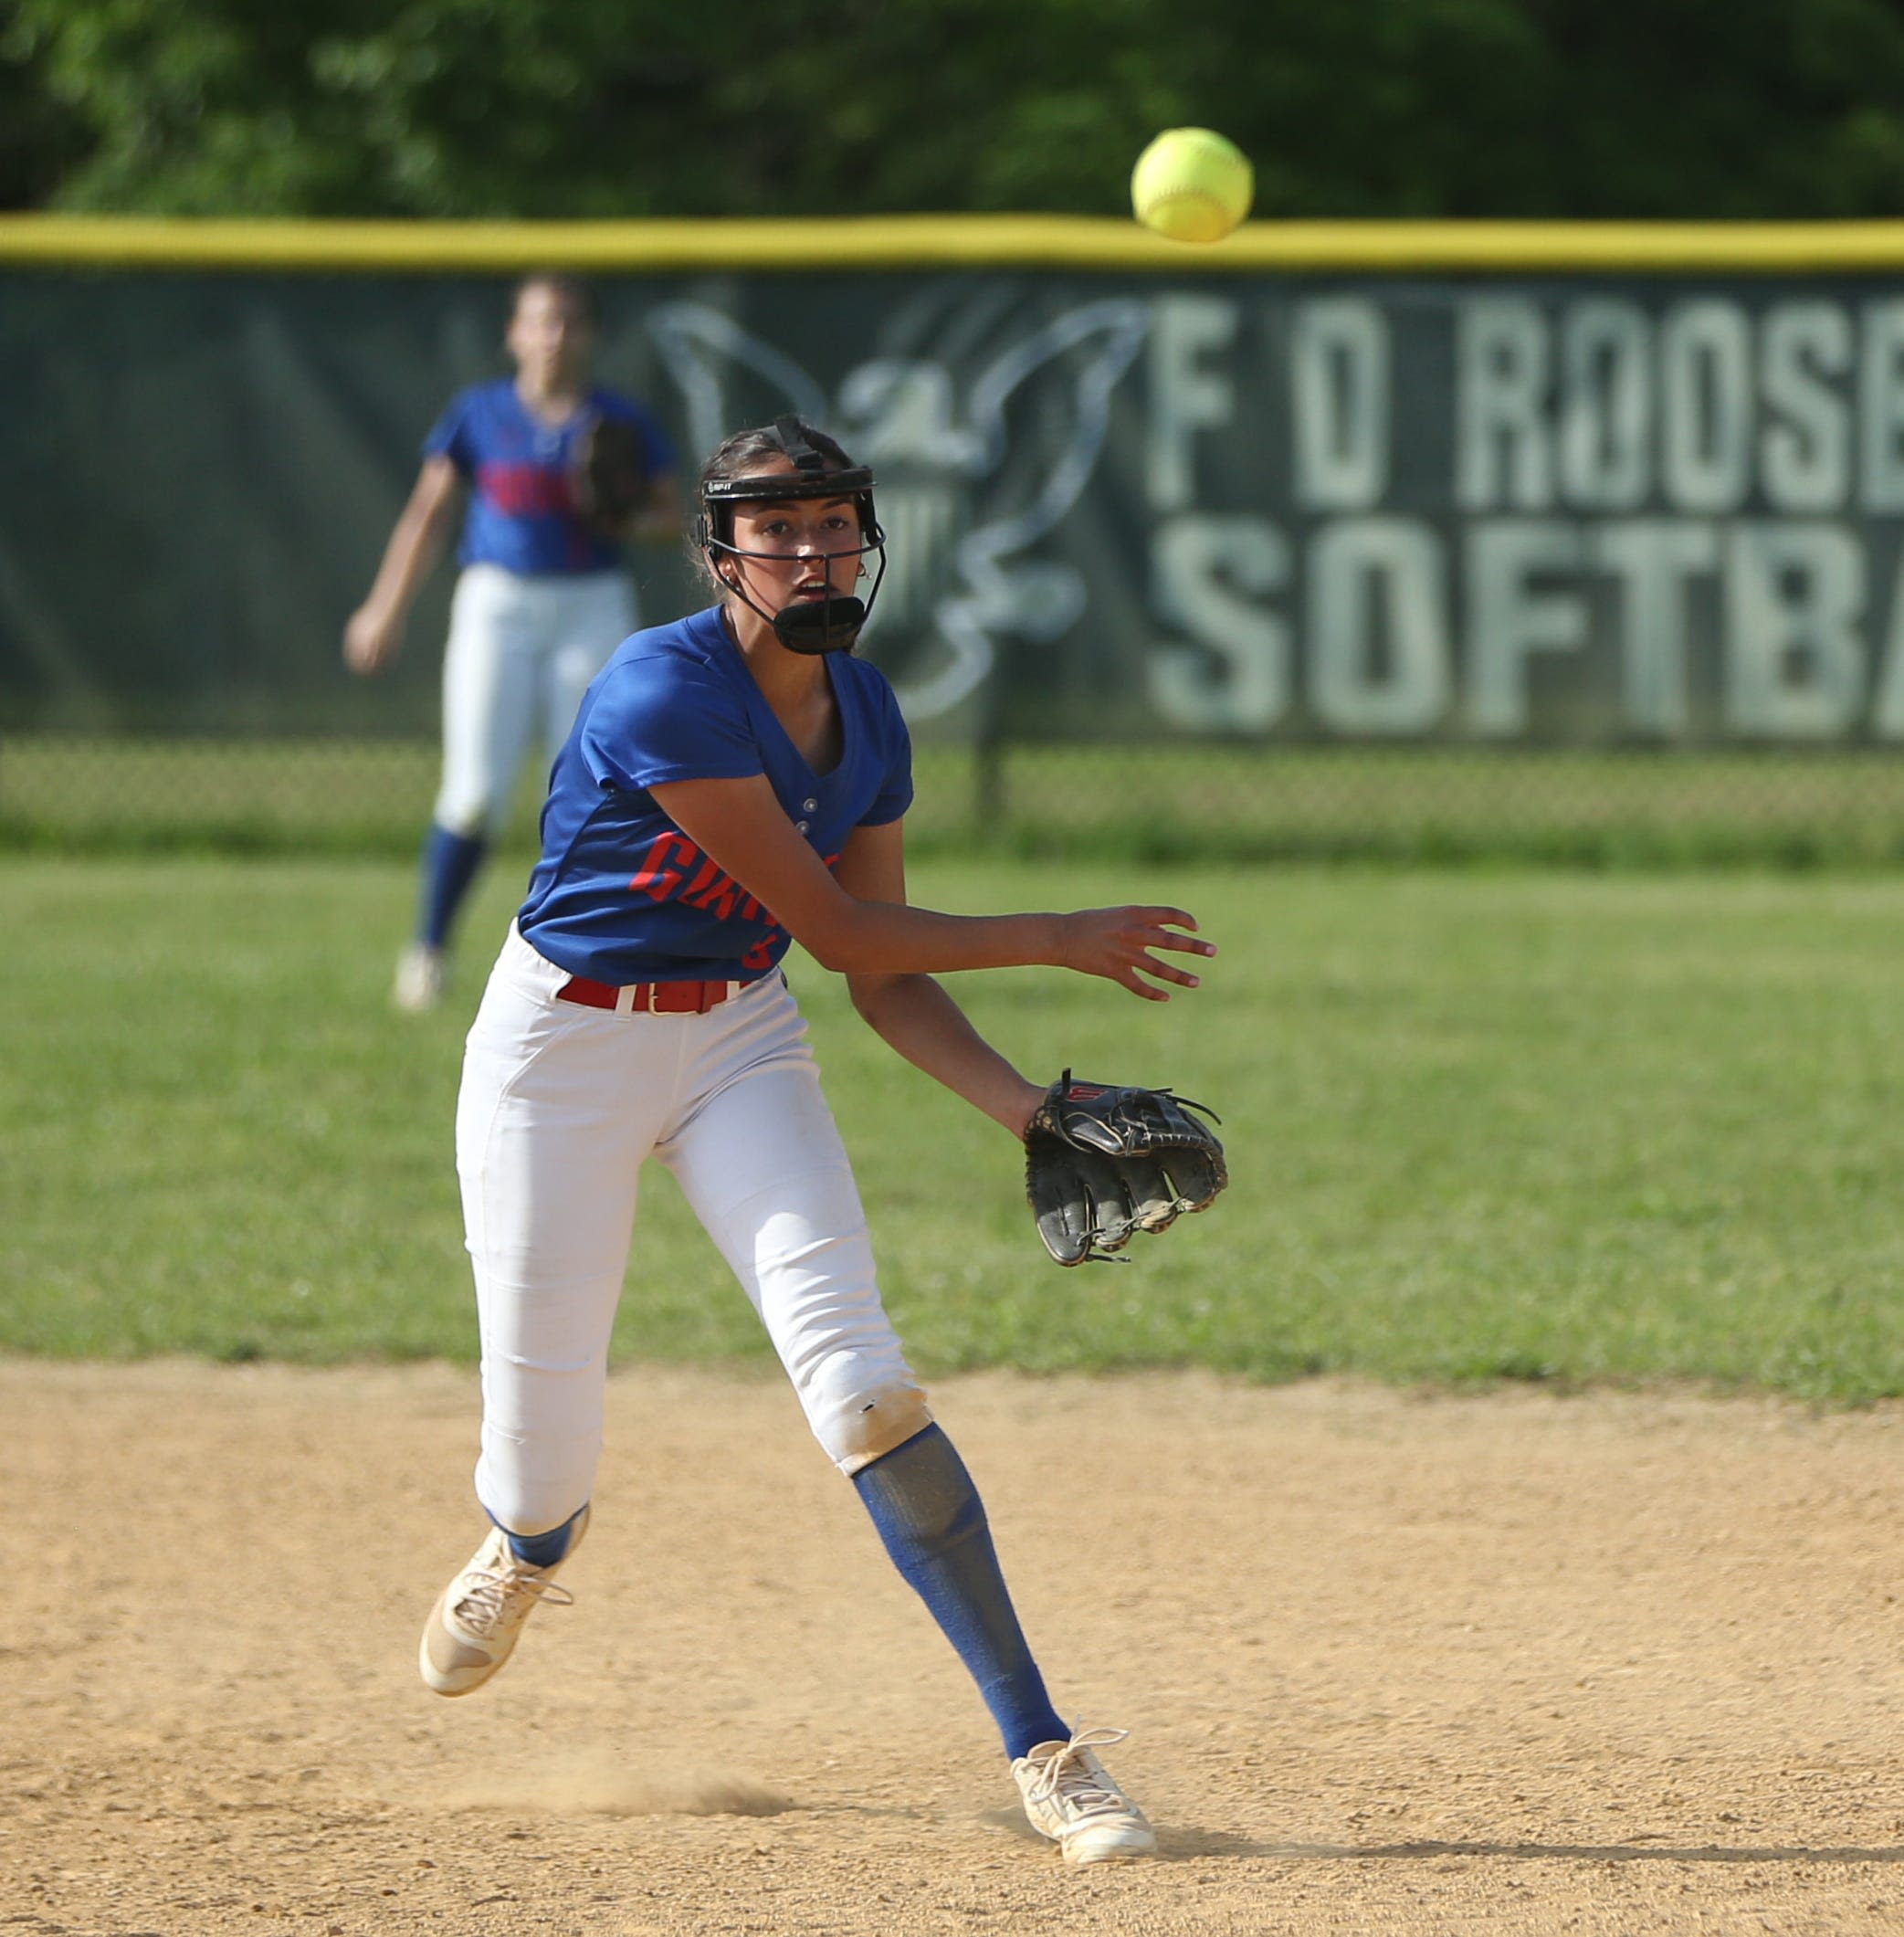 Softball: Freiberger dazzles as Goshen upsets Roosevelt to reach Section 9 semifinals